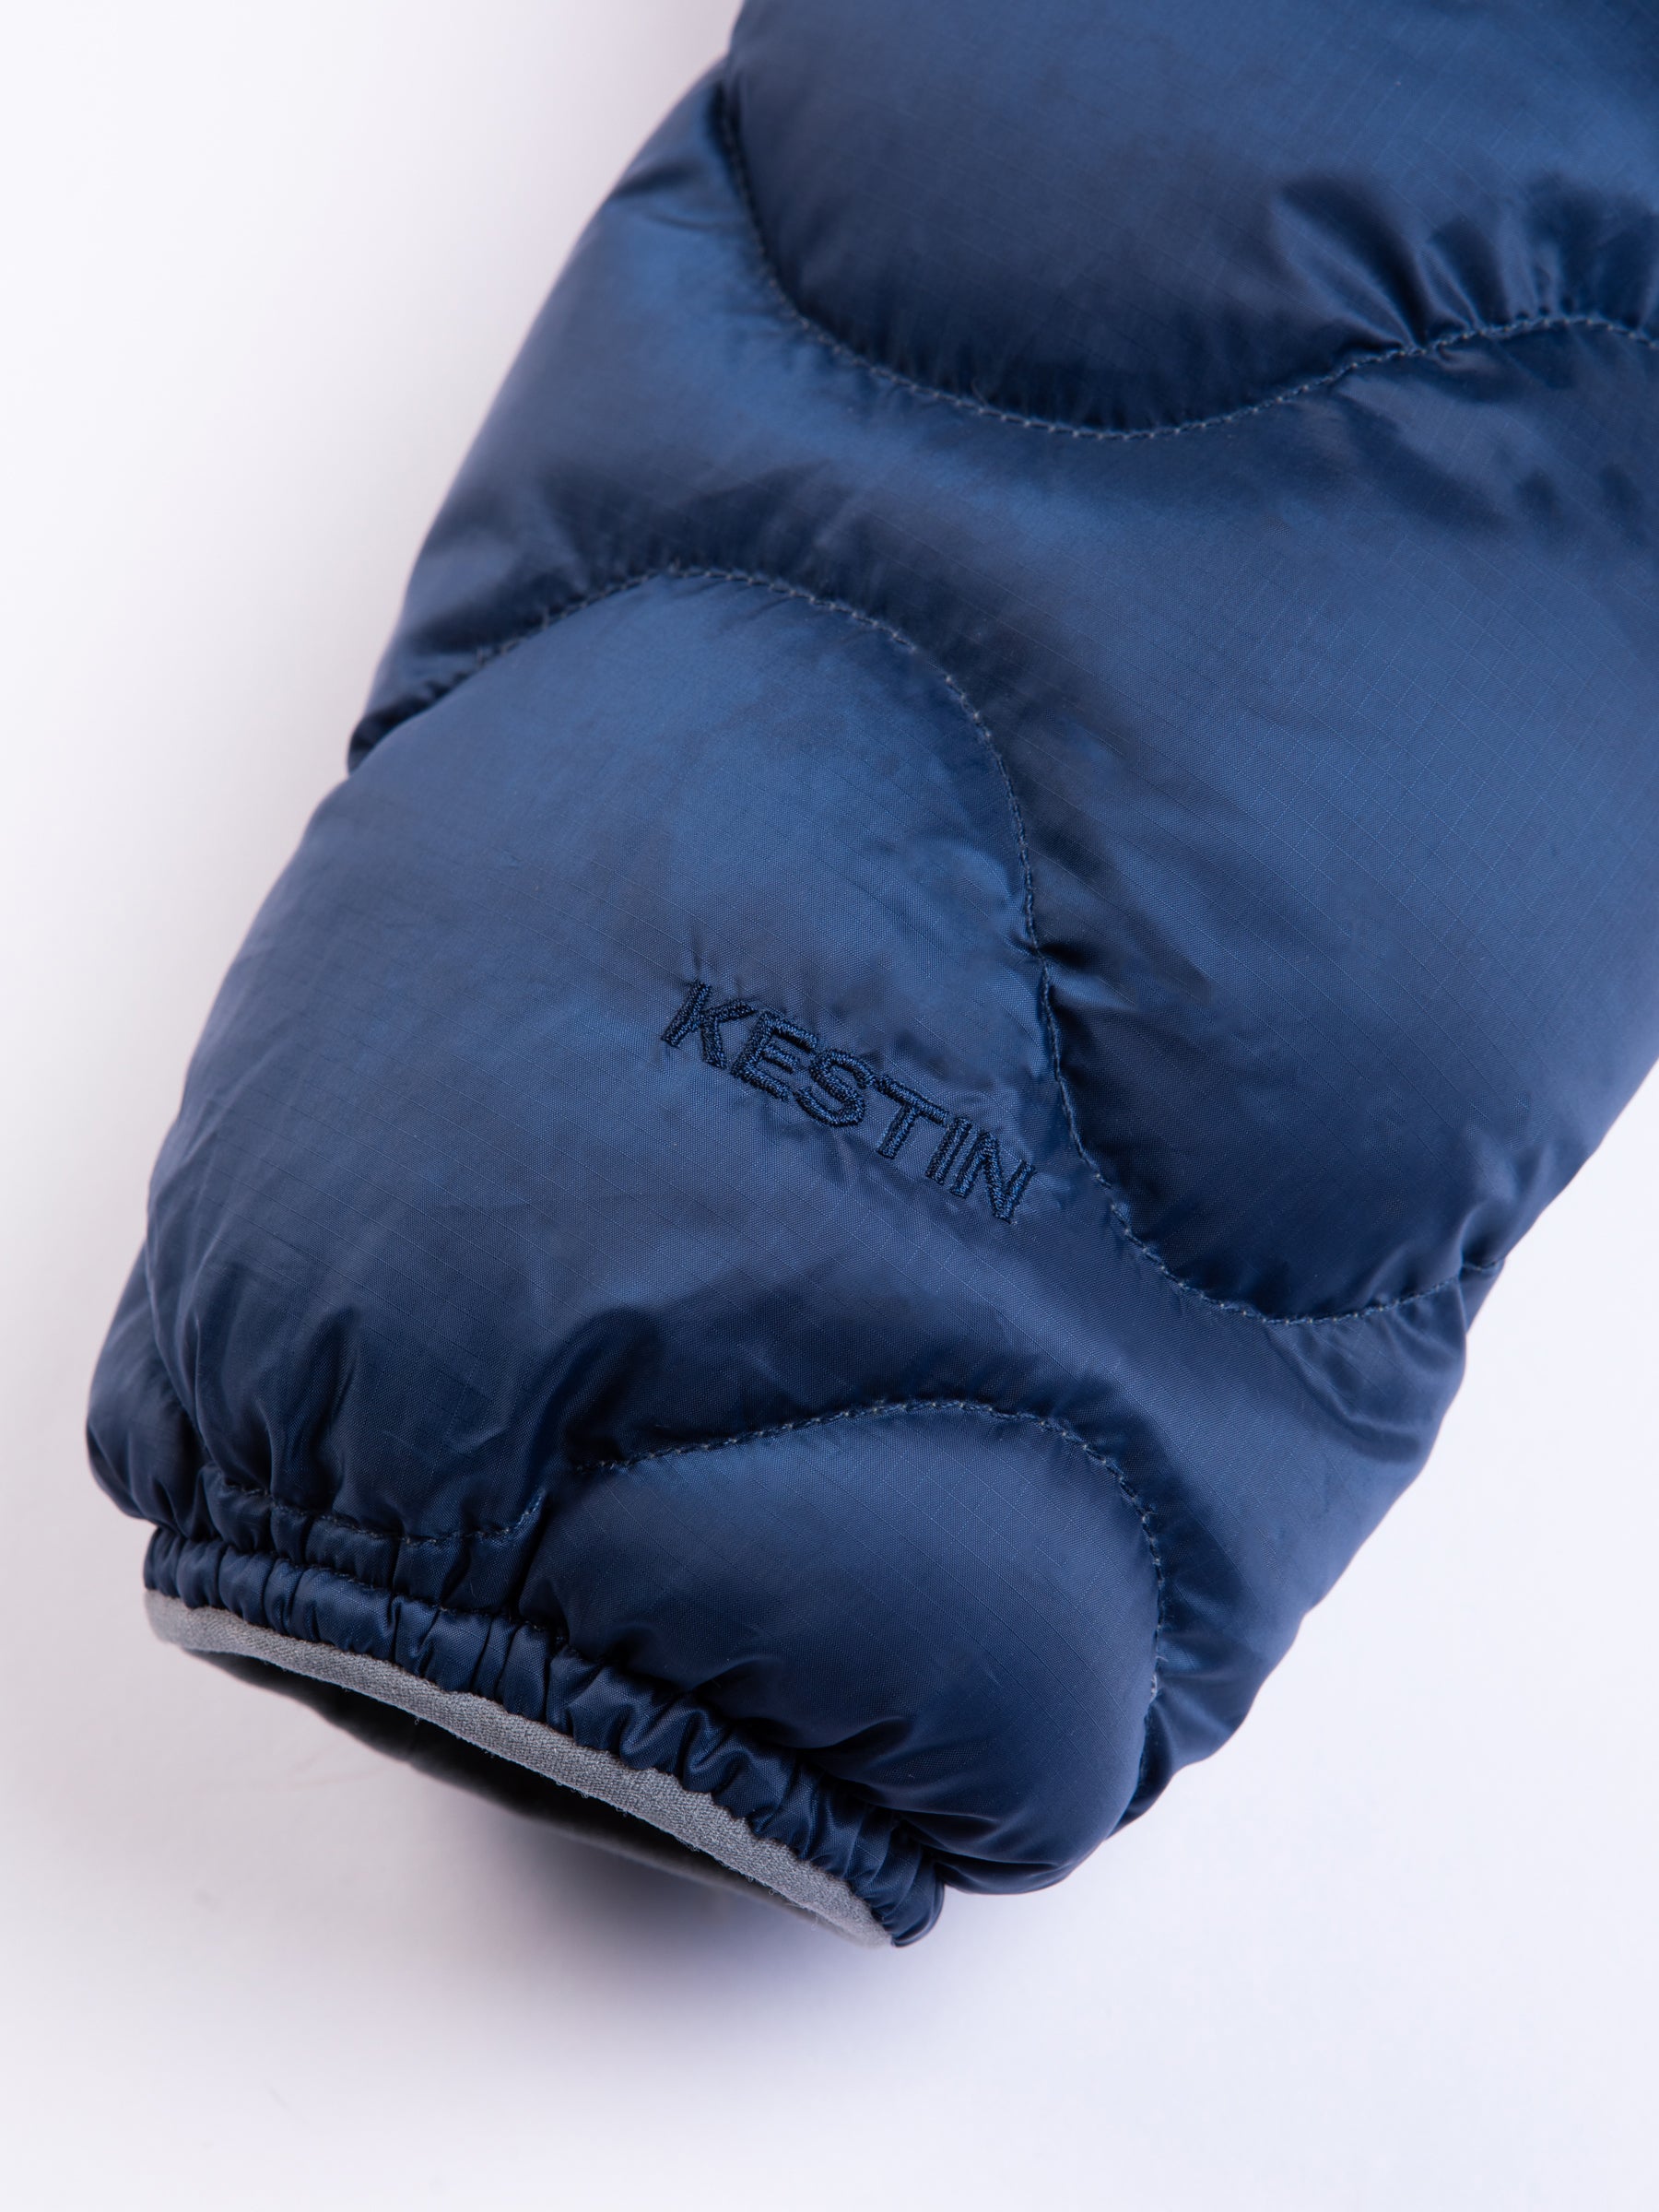 An embroidered KESTIN logo to the cuff of a blue quilted down jacket.